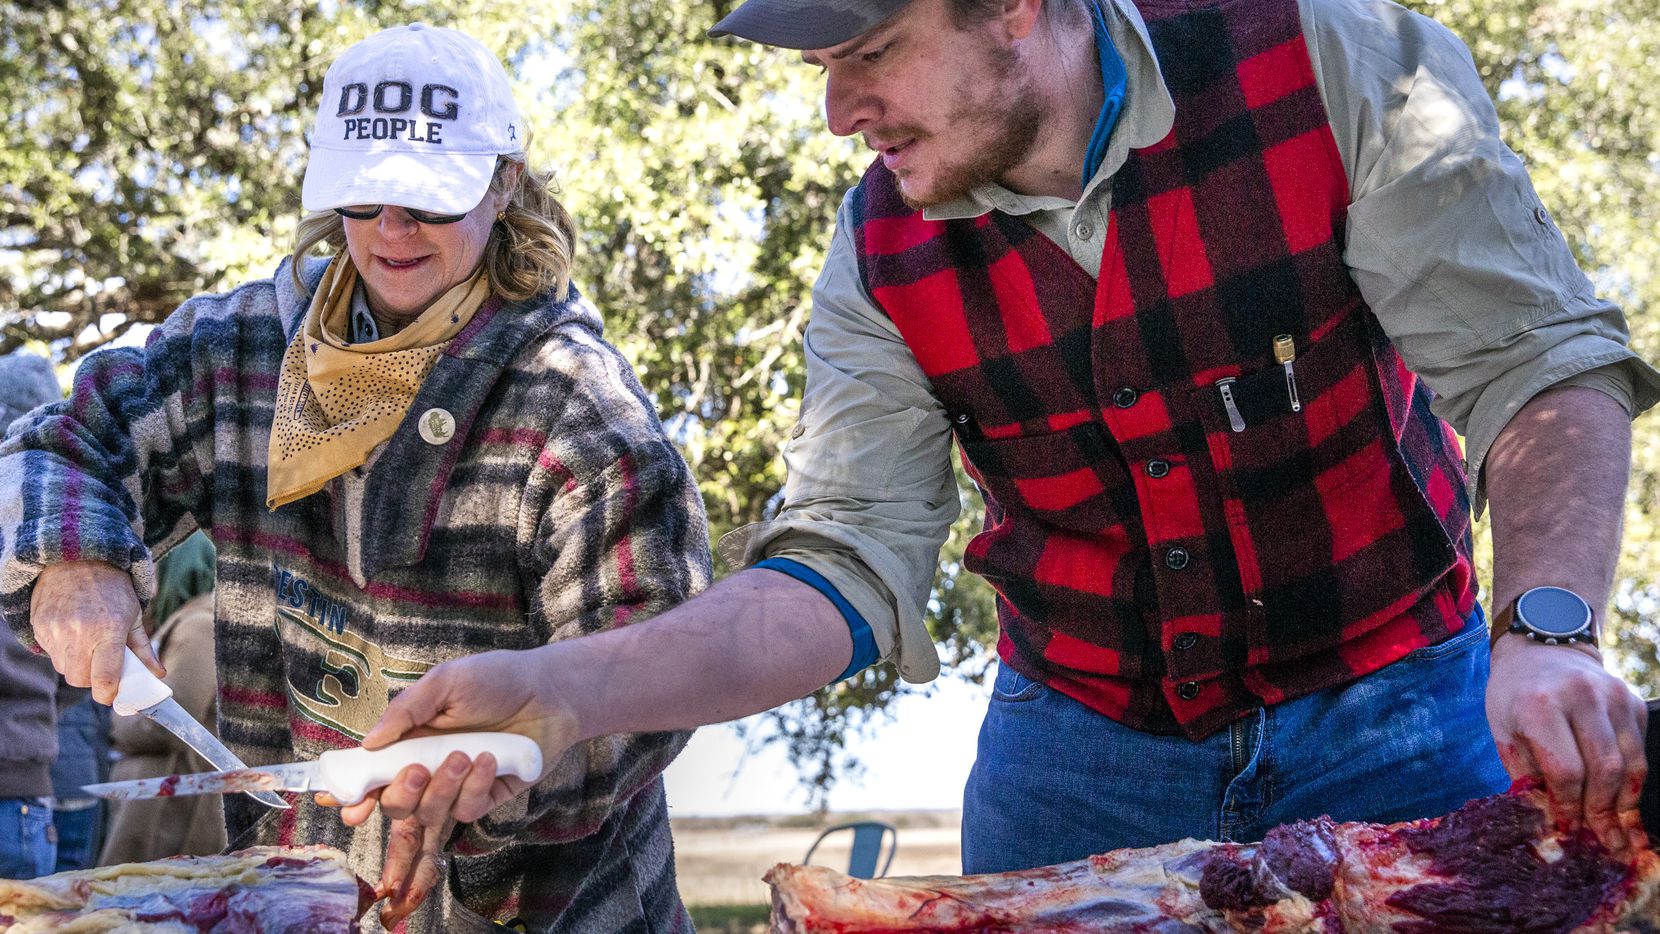 Jacob Arthur (right) from Austin, Texas, gives advice to Cindee Klement as they debone a cut of bison during a daylong bison field harvest event at Roam Ranch in Fredericksburg, Texas, on Sunday, Jan. 19, 2020.